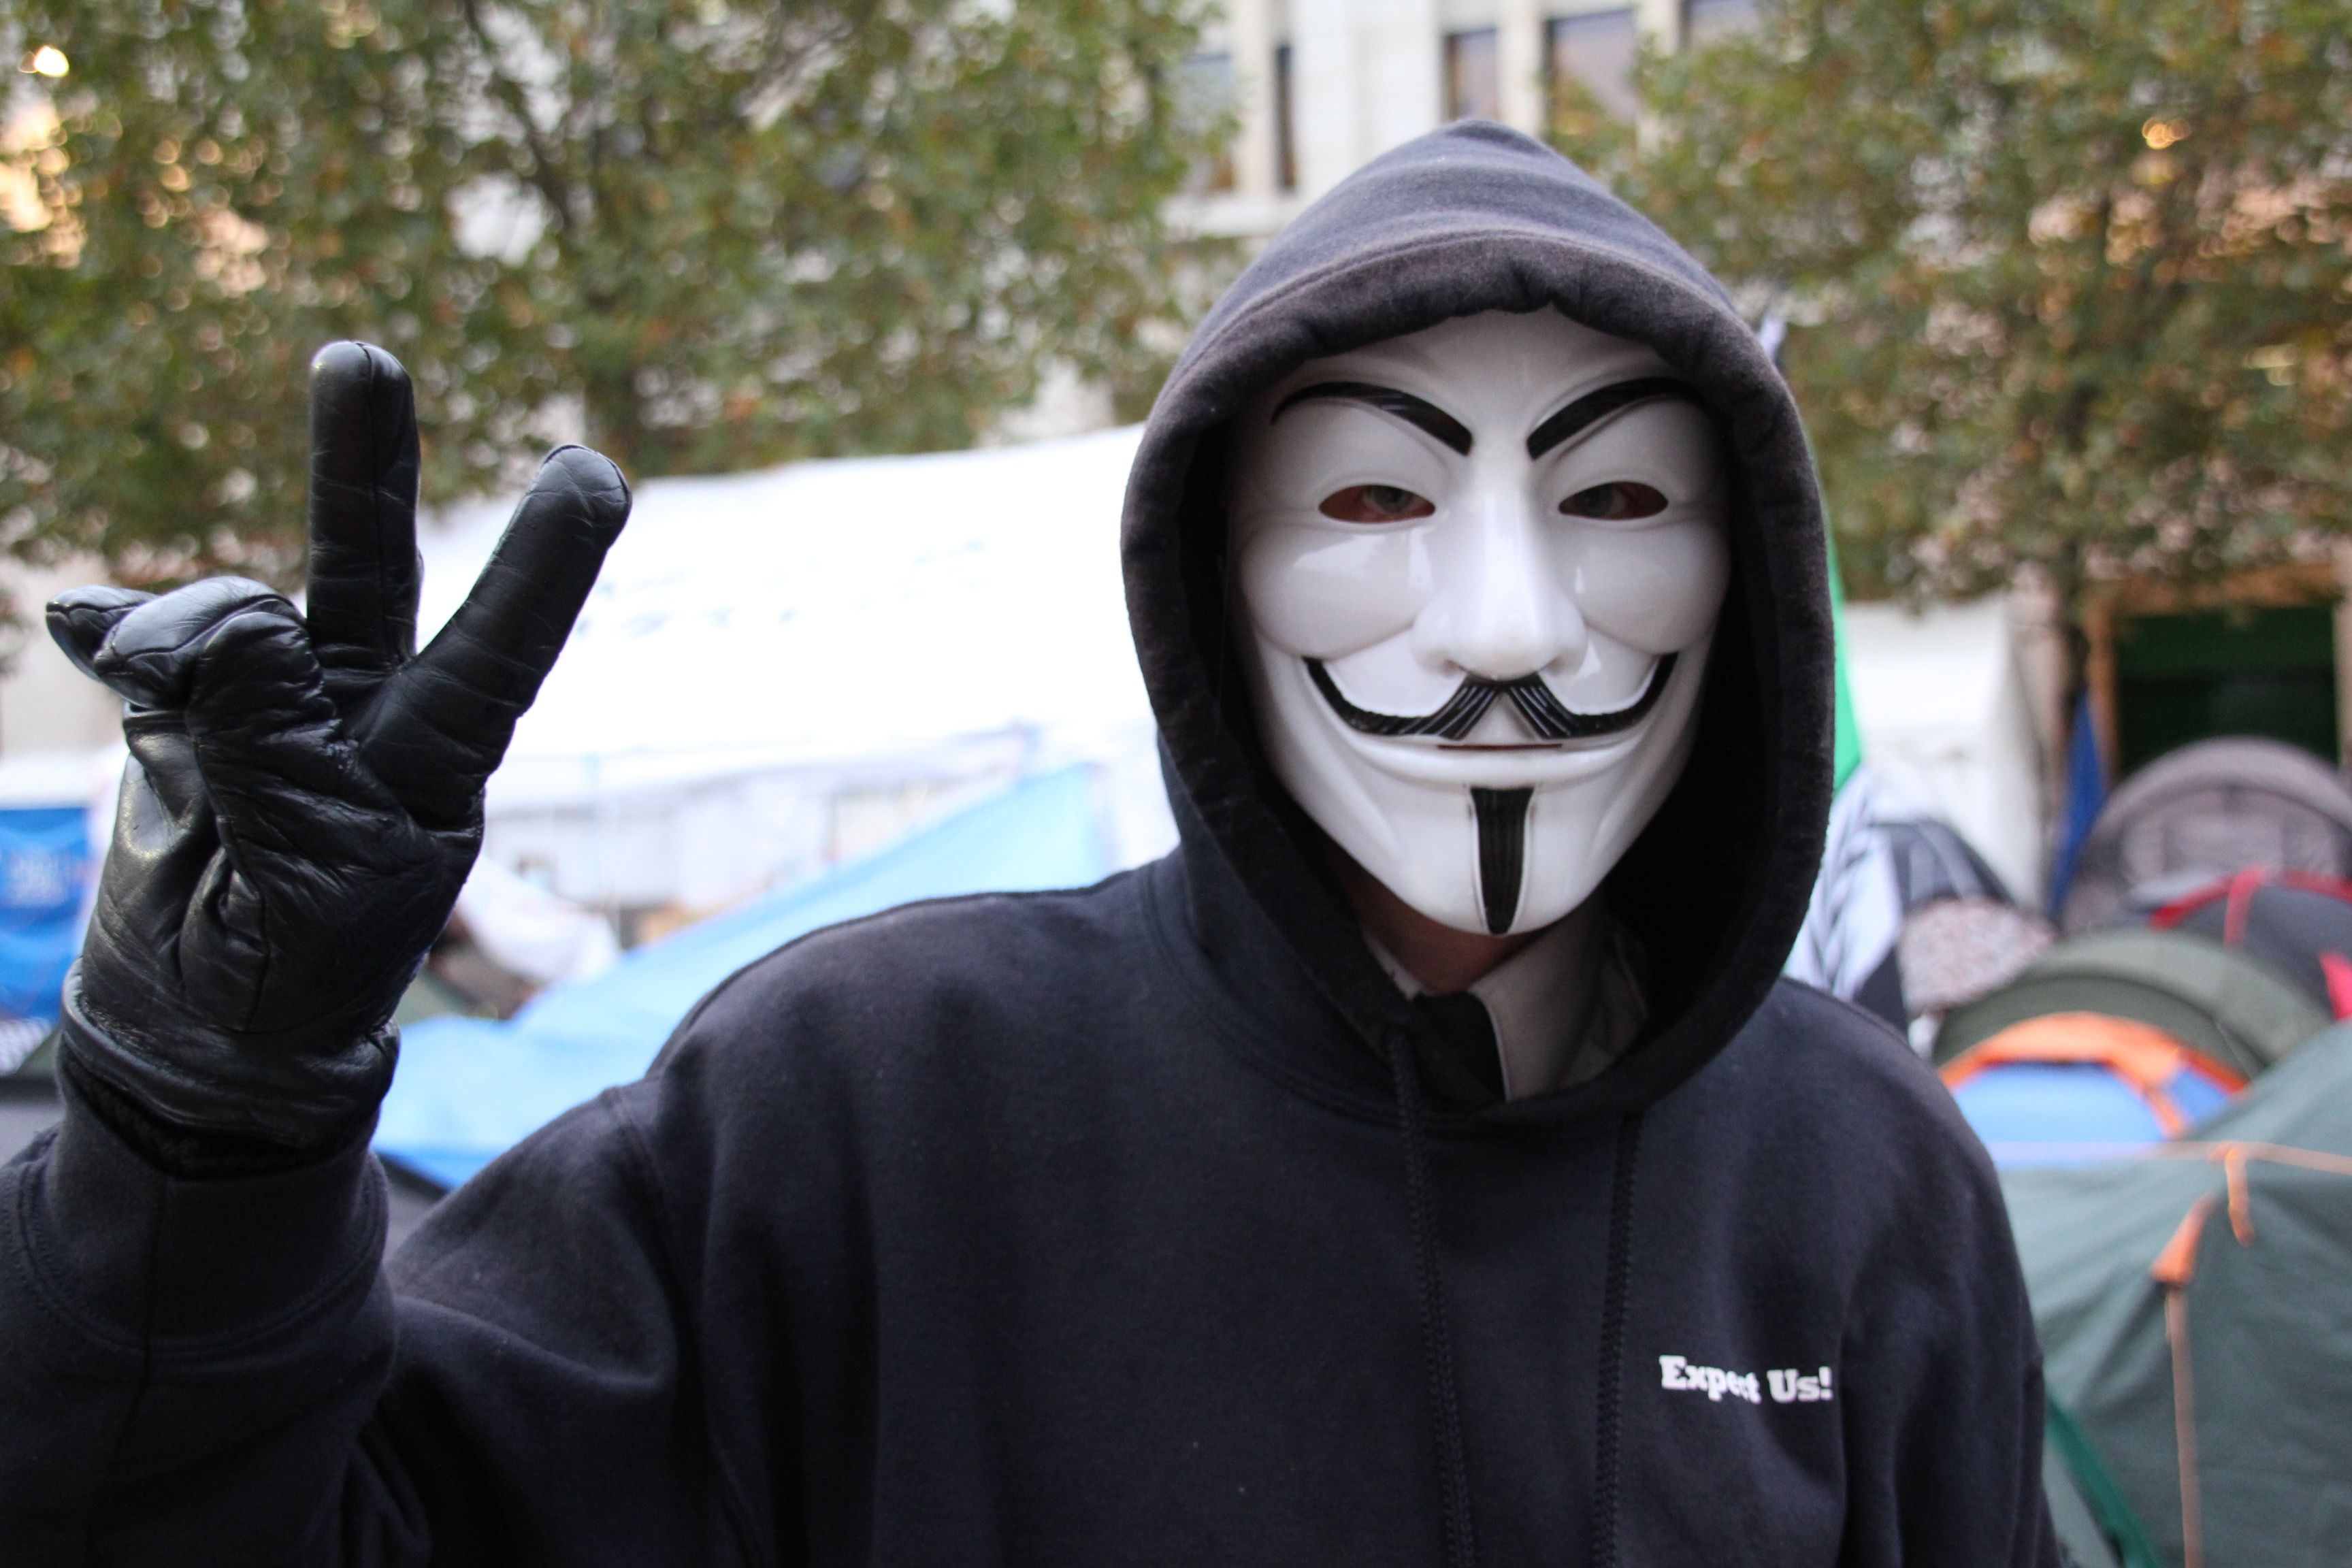 Guy Fawkes mask inspires Occupy protests around the world